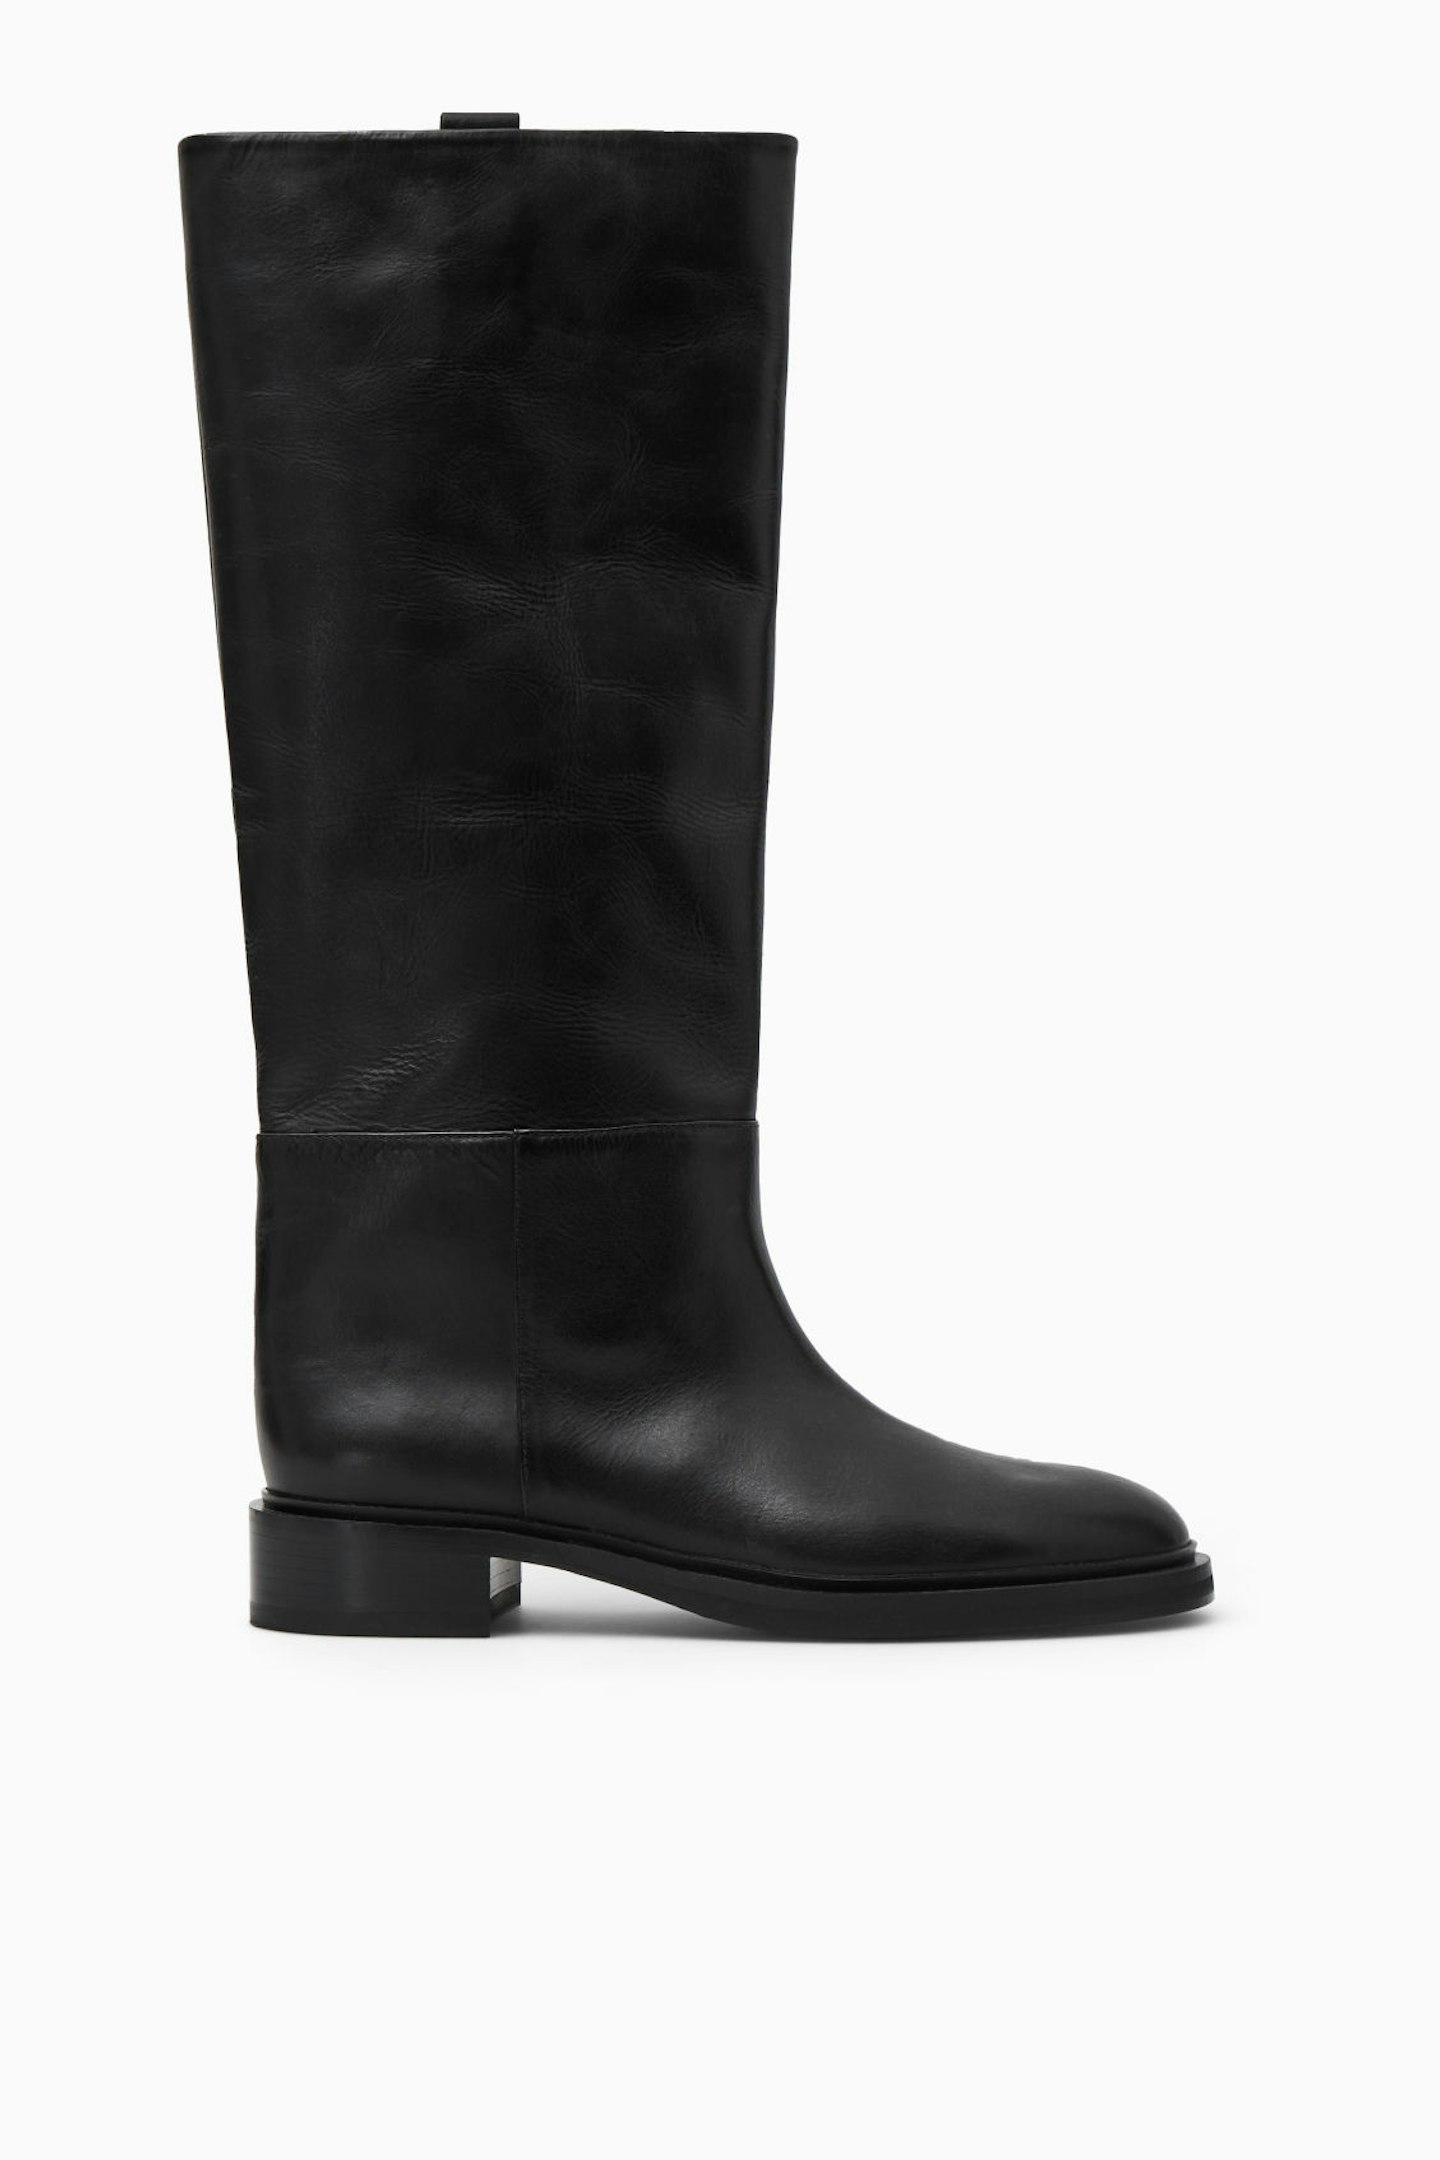 COS, Leather Riding Boots